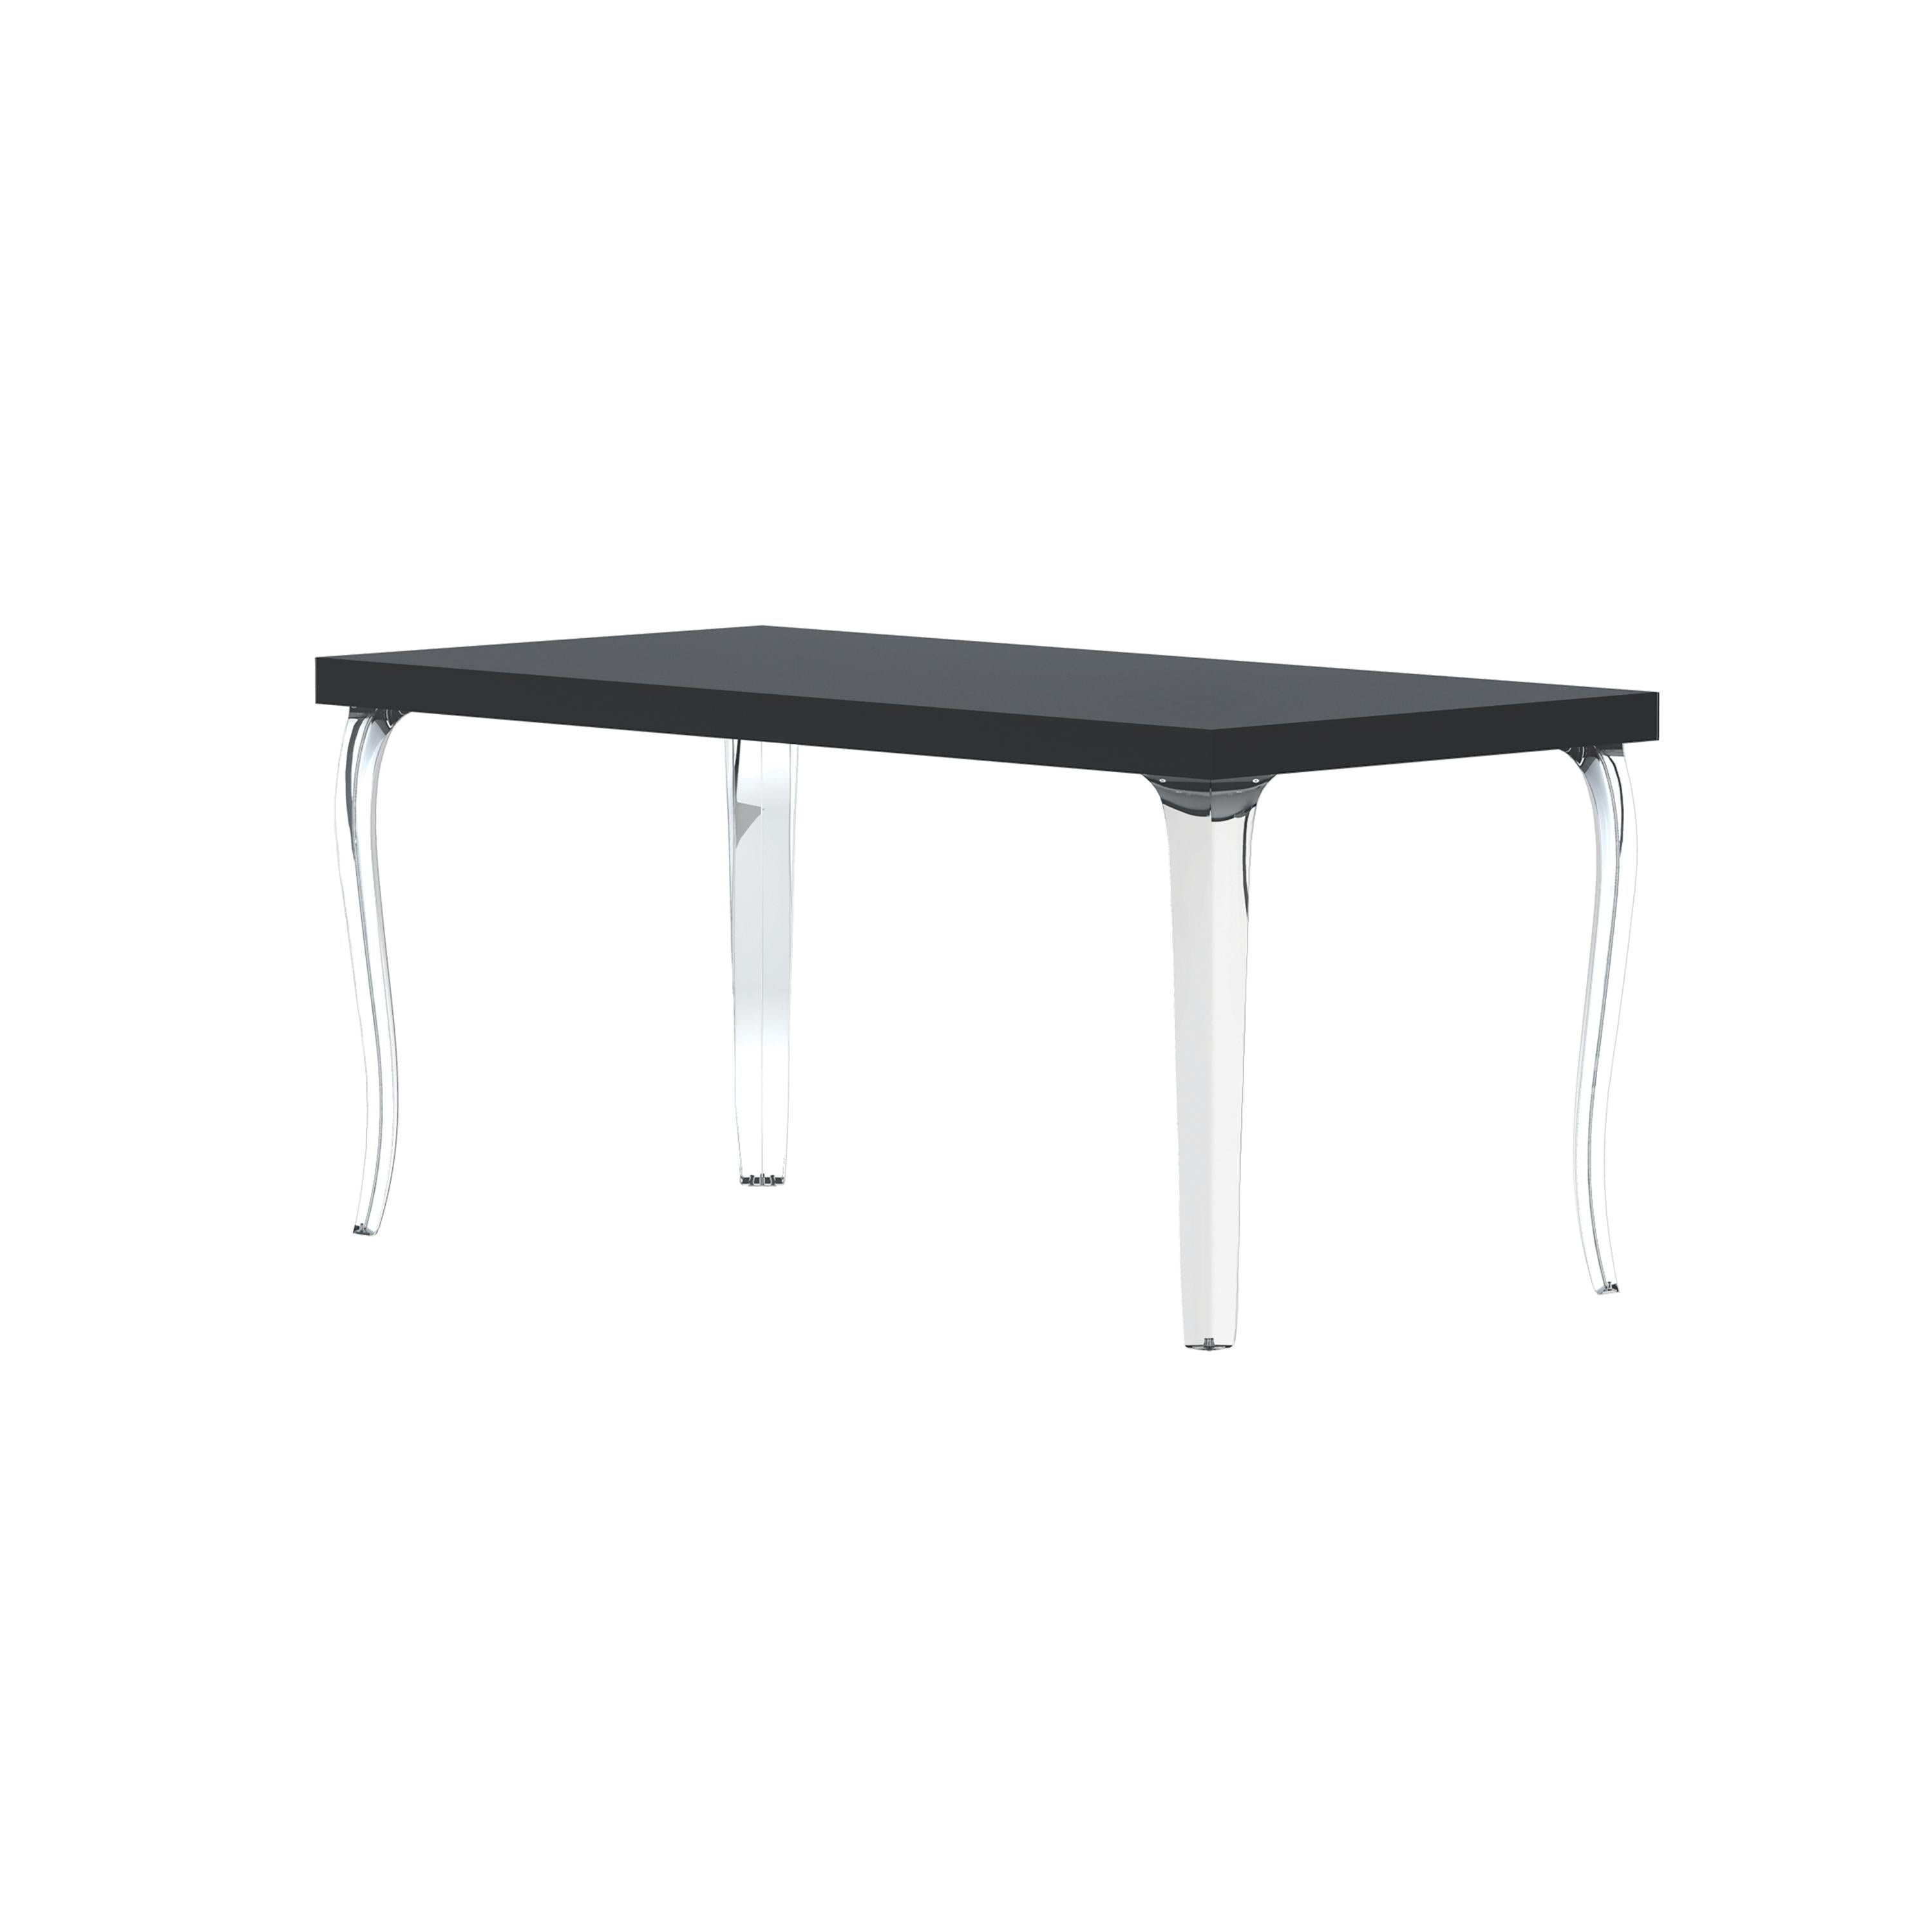 The B.B collection consists of a dining table with seats, which recall Wanders' 